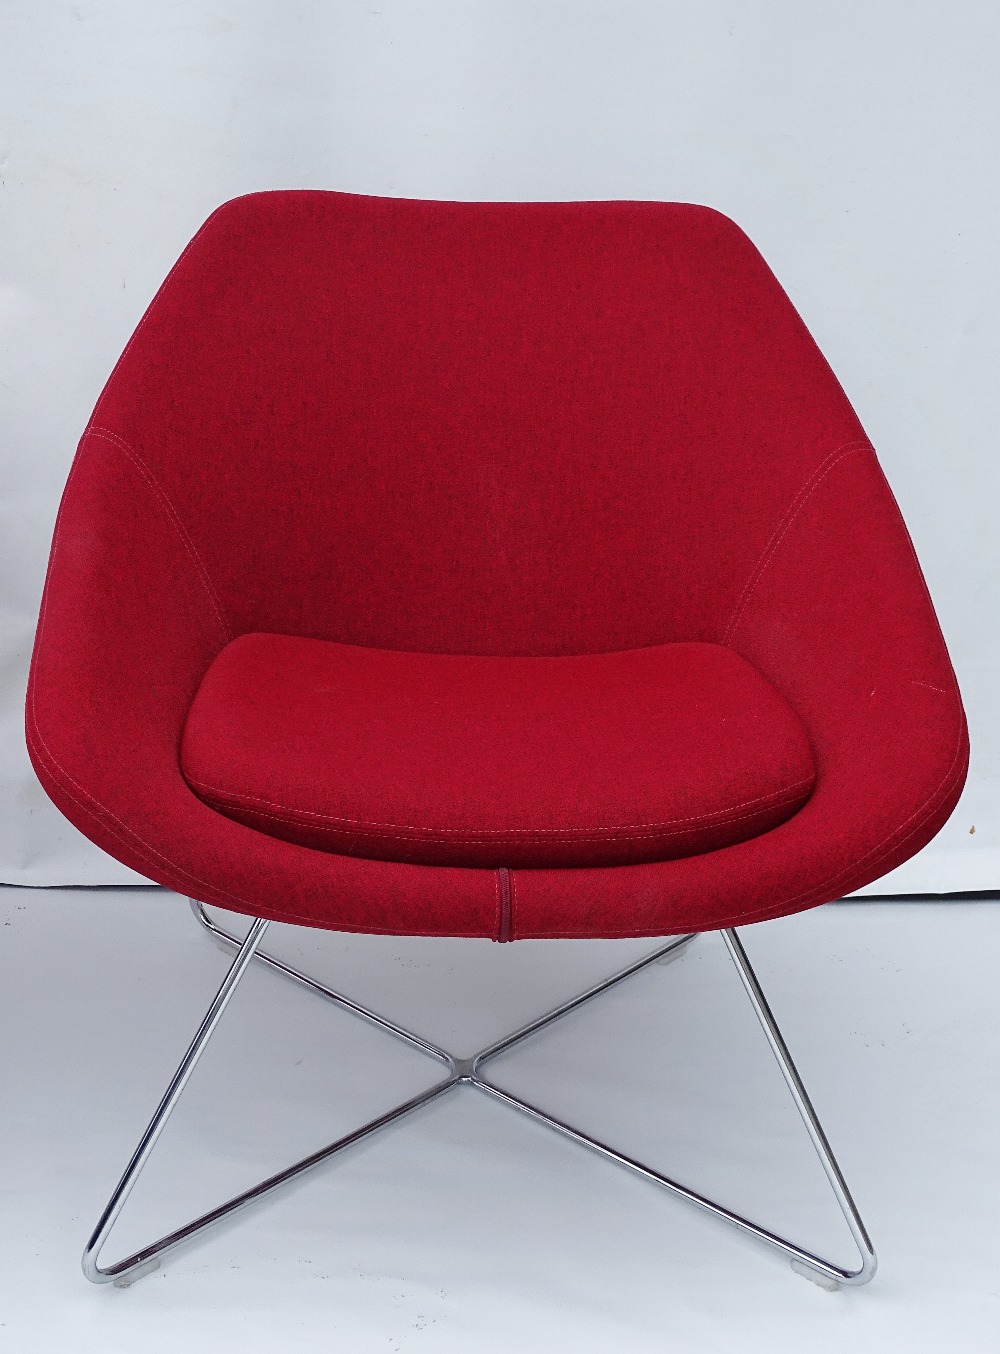 Mid Century Furniture - An Allermuir red upholstered chair model A642 with chromed frame.